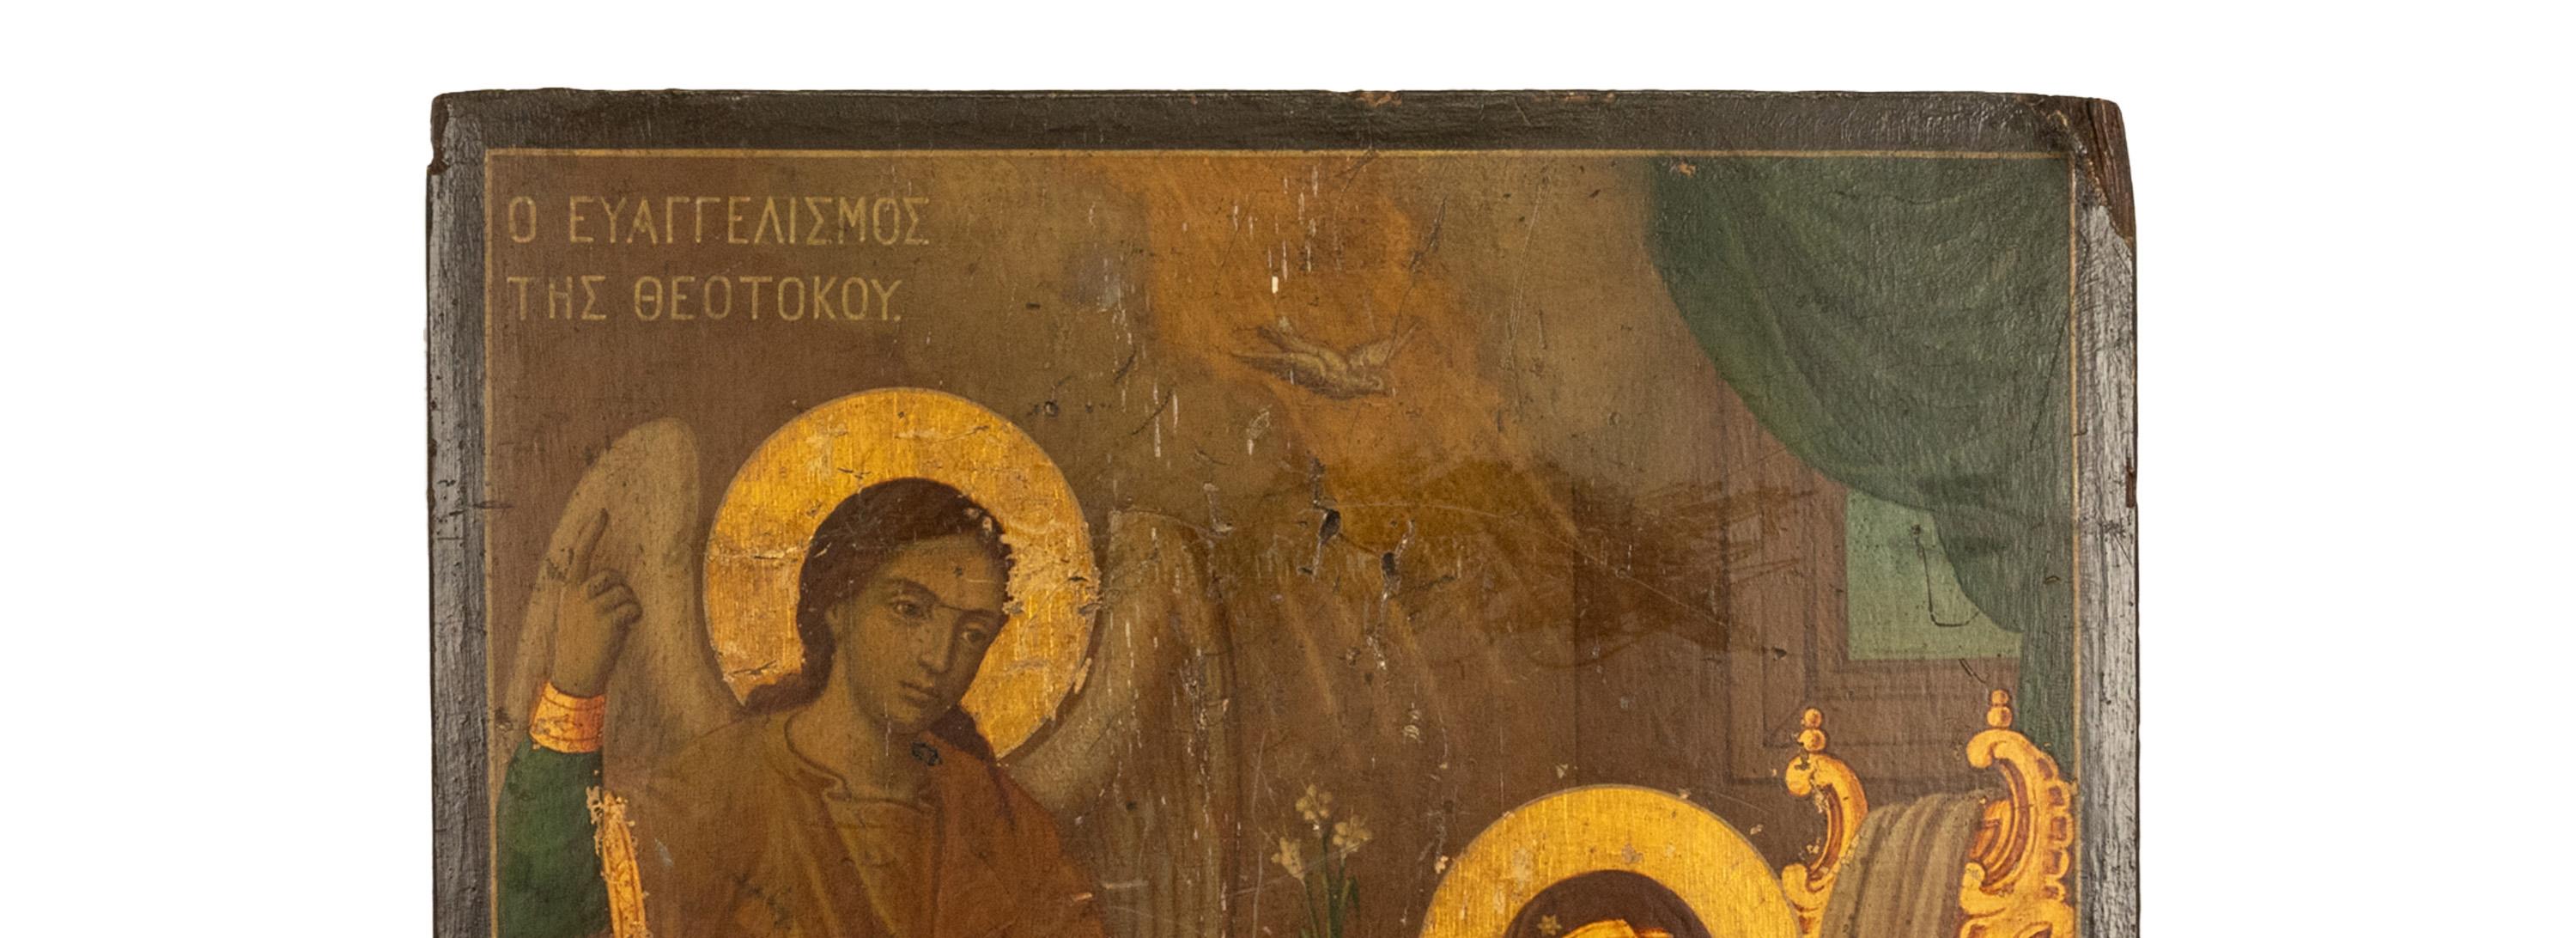 A fine antique 18th Century Greek Orthodox icon, egg tempera & gold leaf on wood panel, circa 1750.
The icon depicts the Annunciation of the Virgin Mary, to the left is the Angel Gabriel presenting a flower to the Virgin and pointing to the heavens,